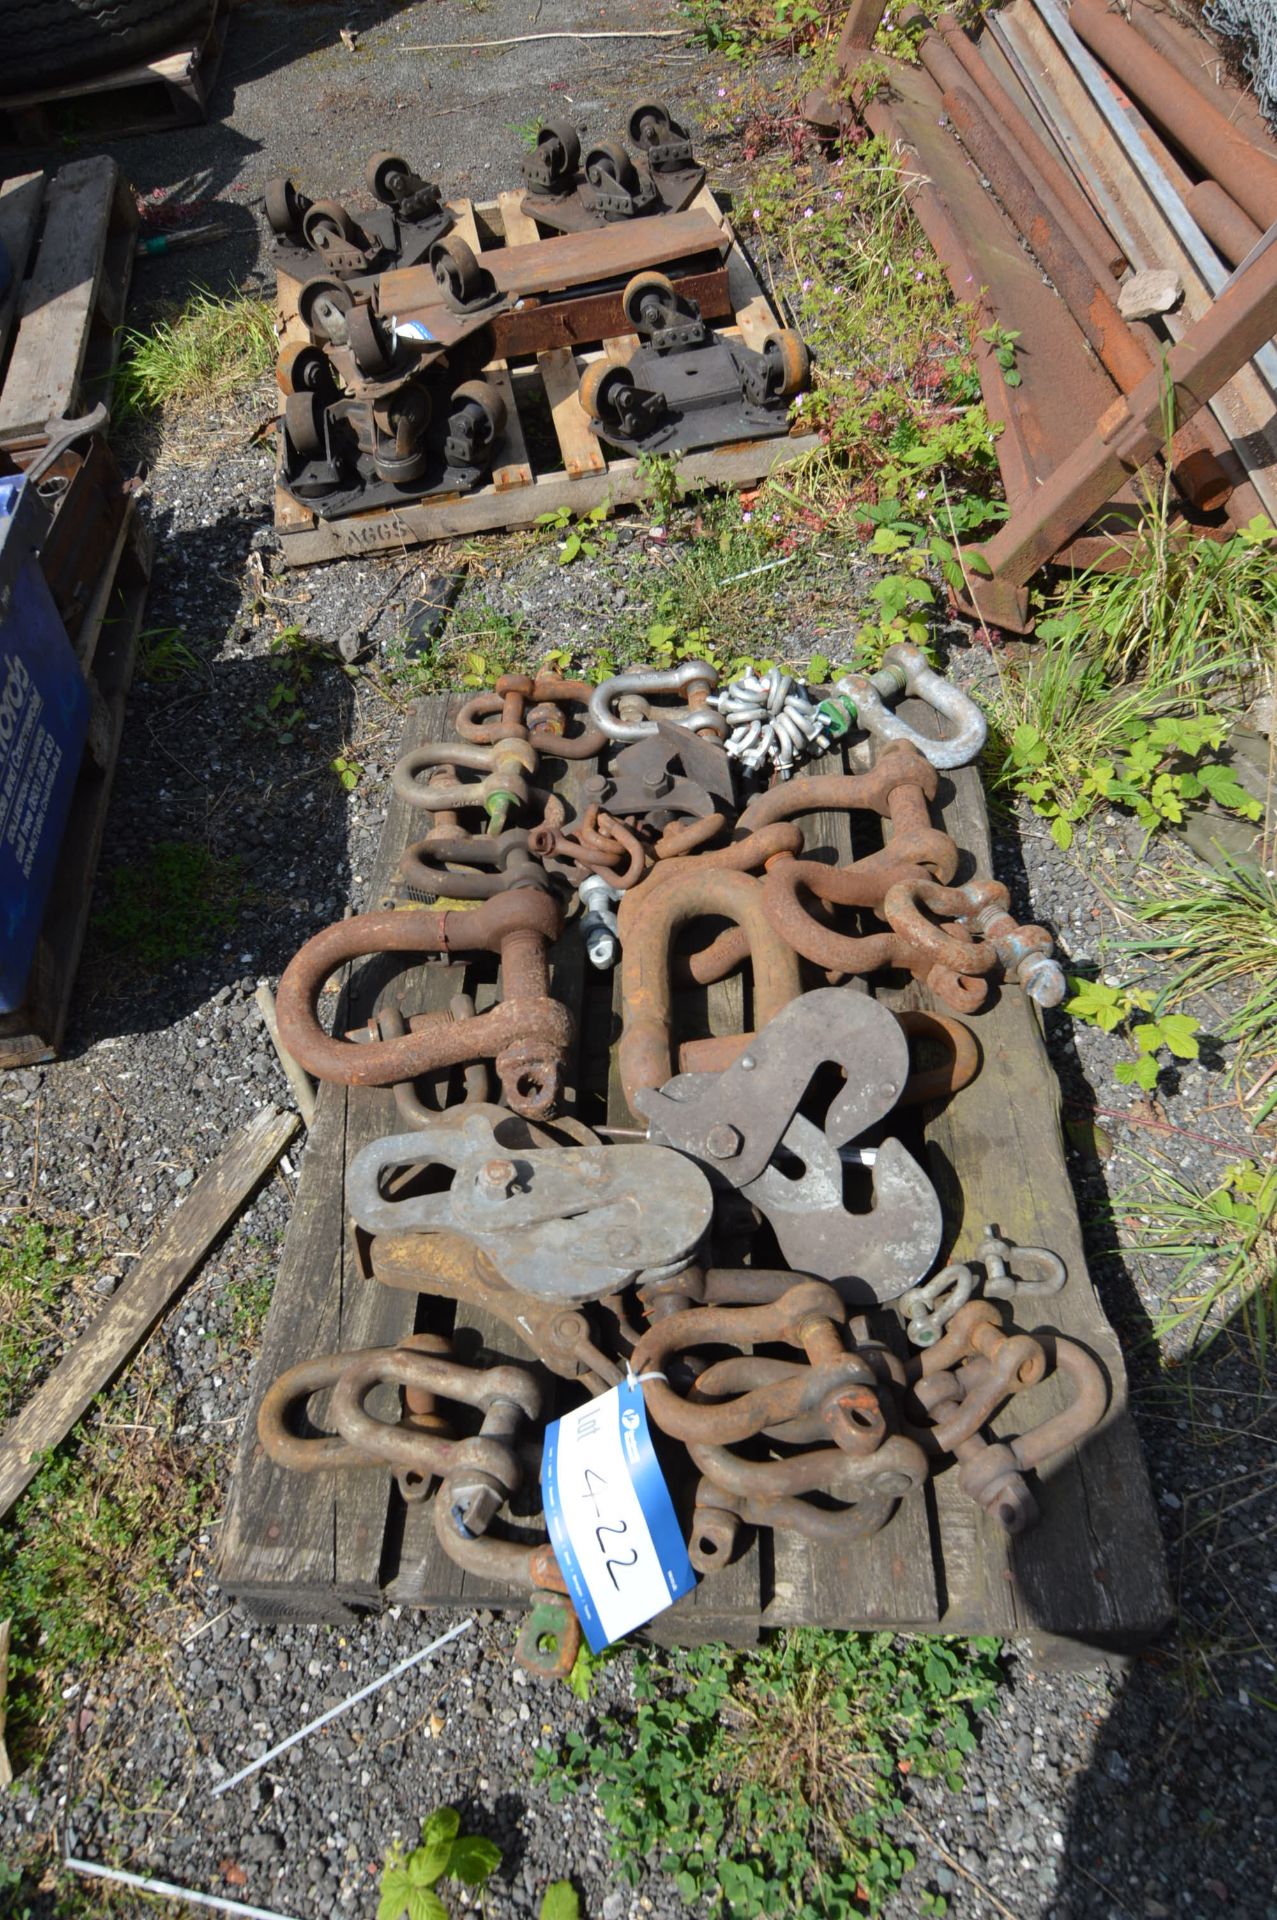 Assorted Lifting Equipment on pallet